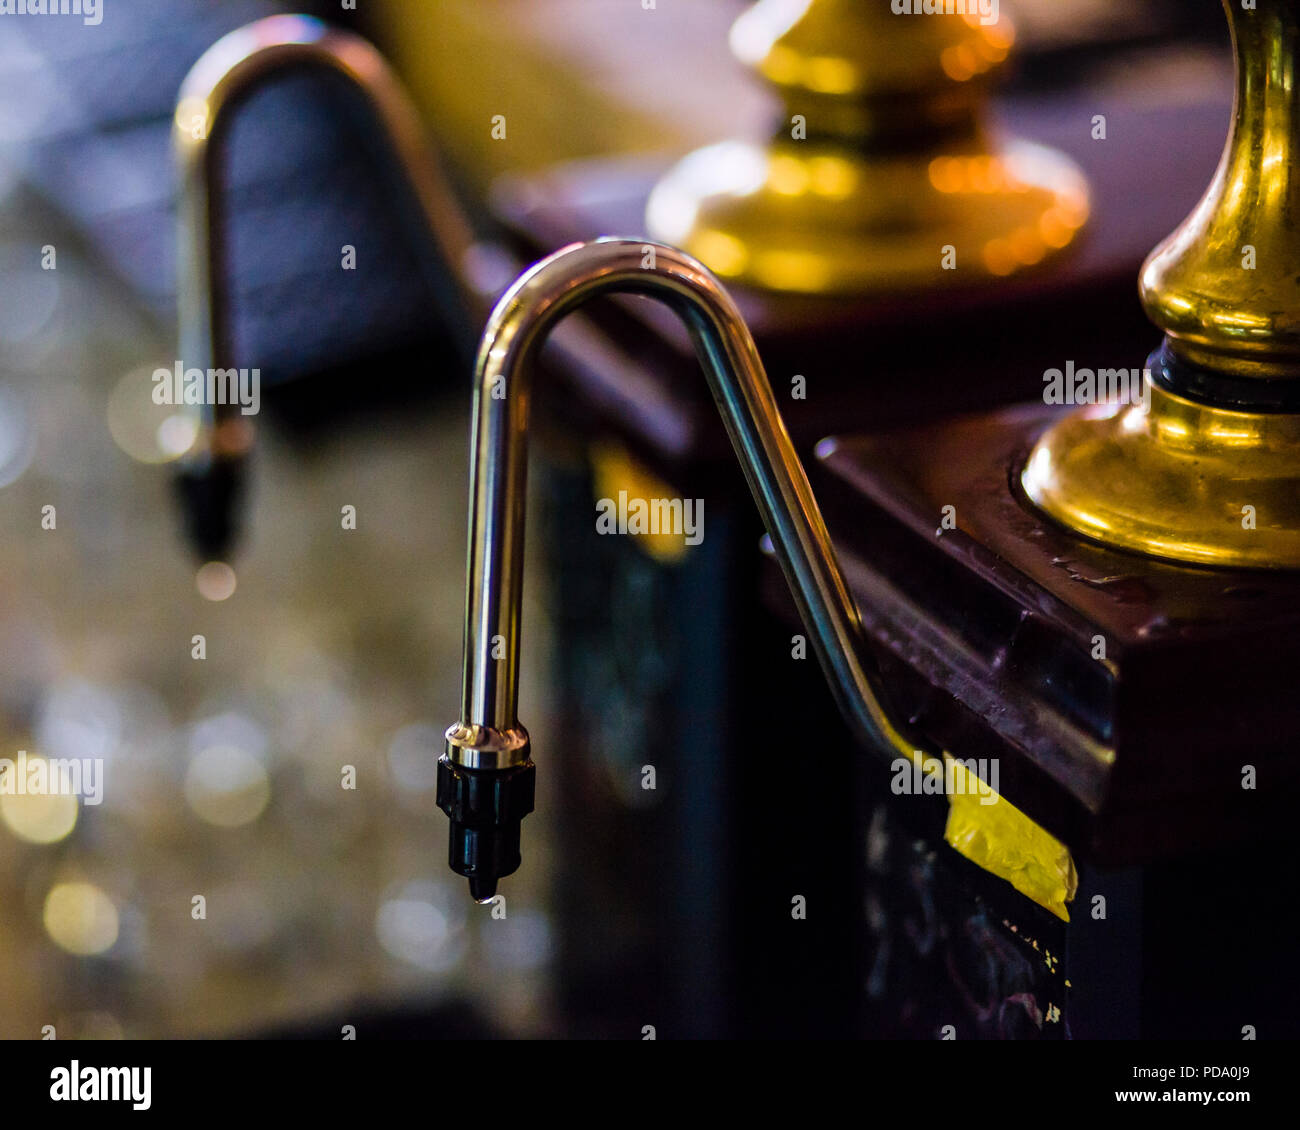 Pumps in a bar in Bradford, West Yorkshire, UK Stock Photo